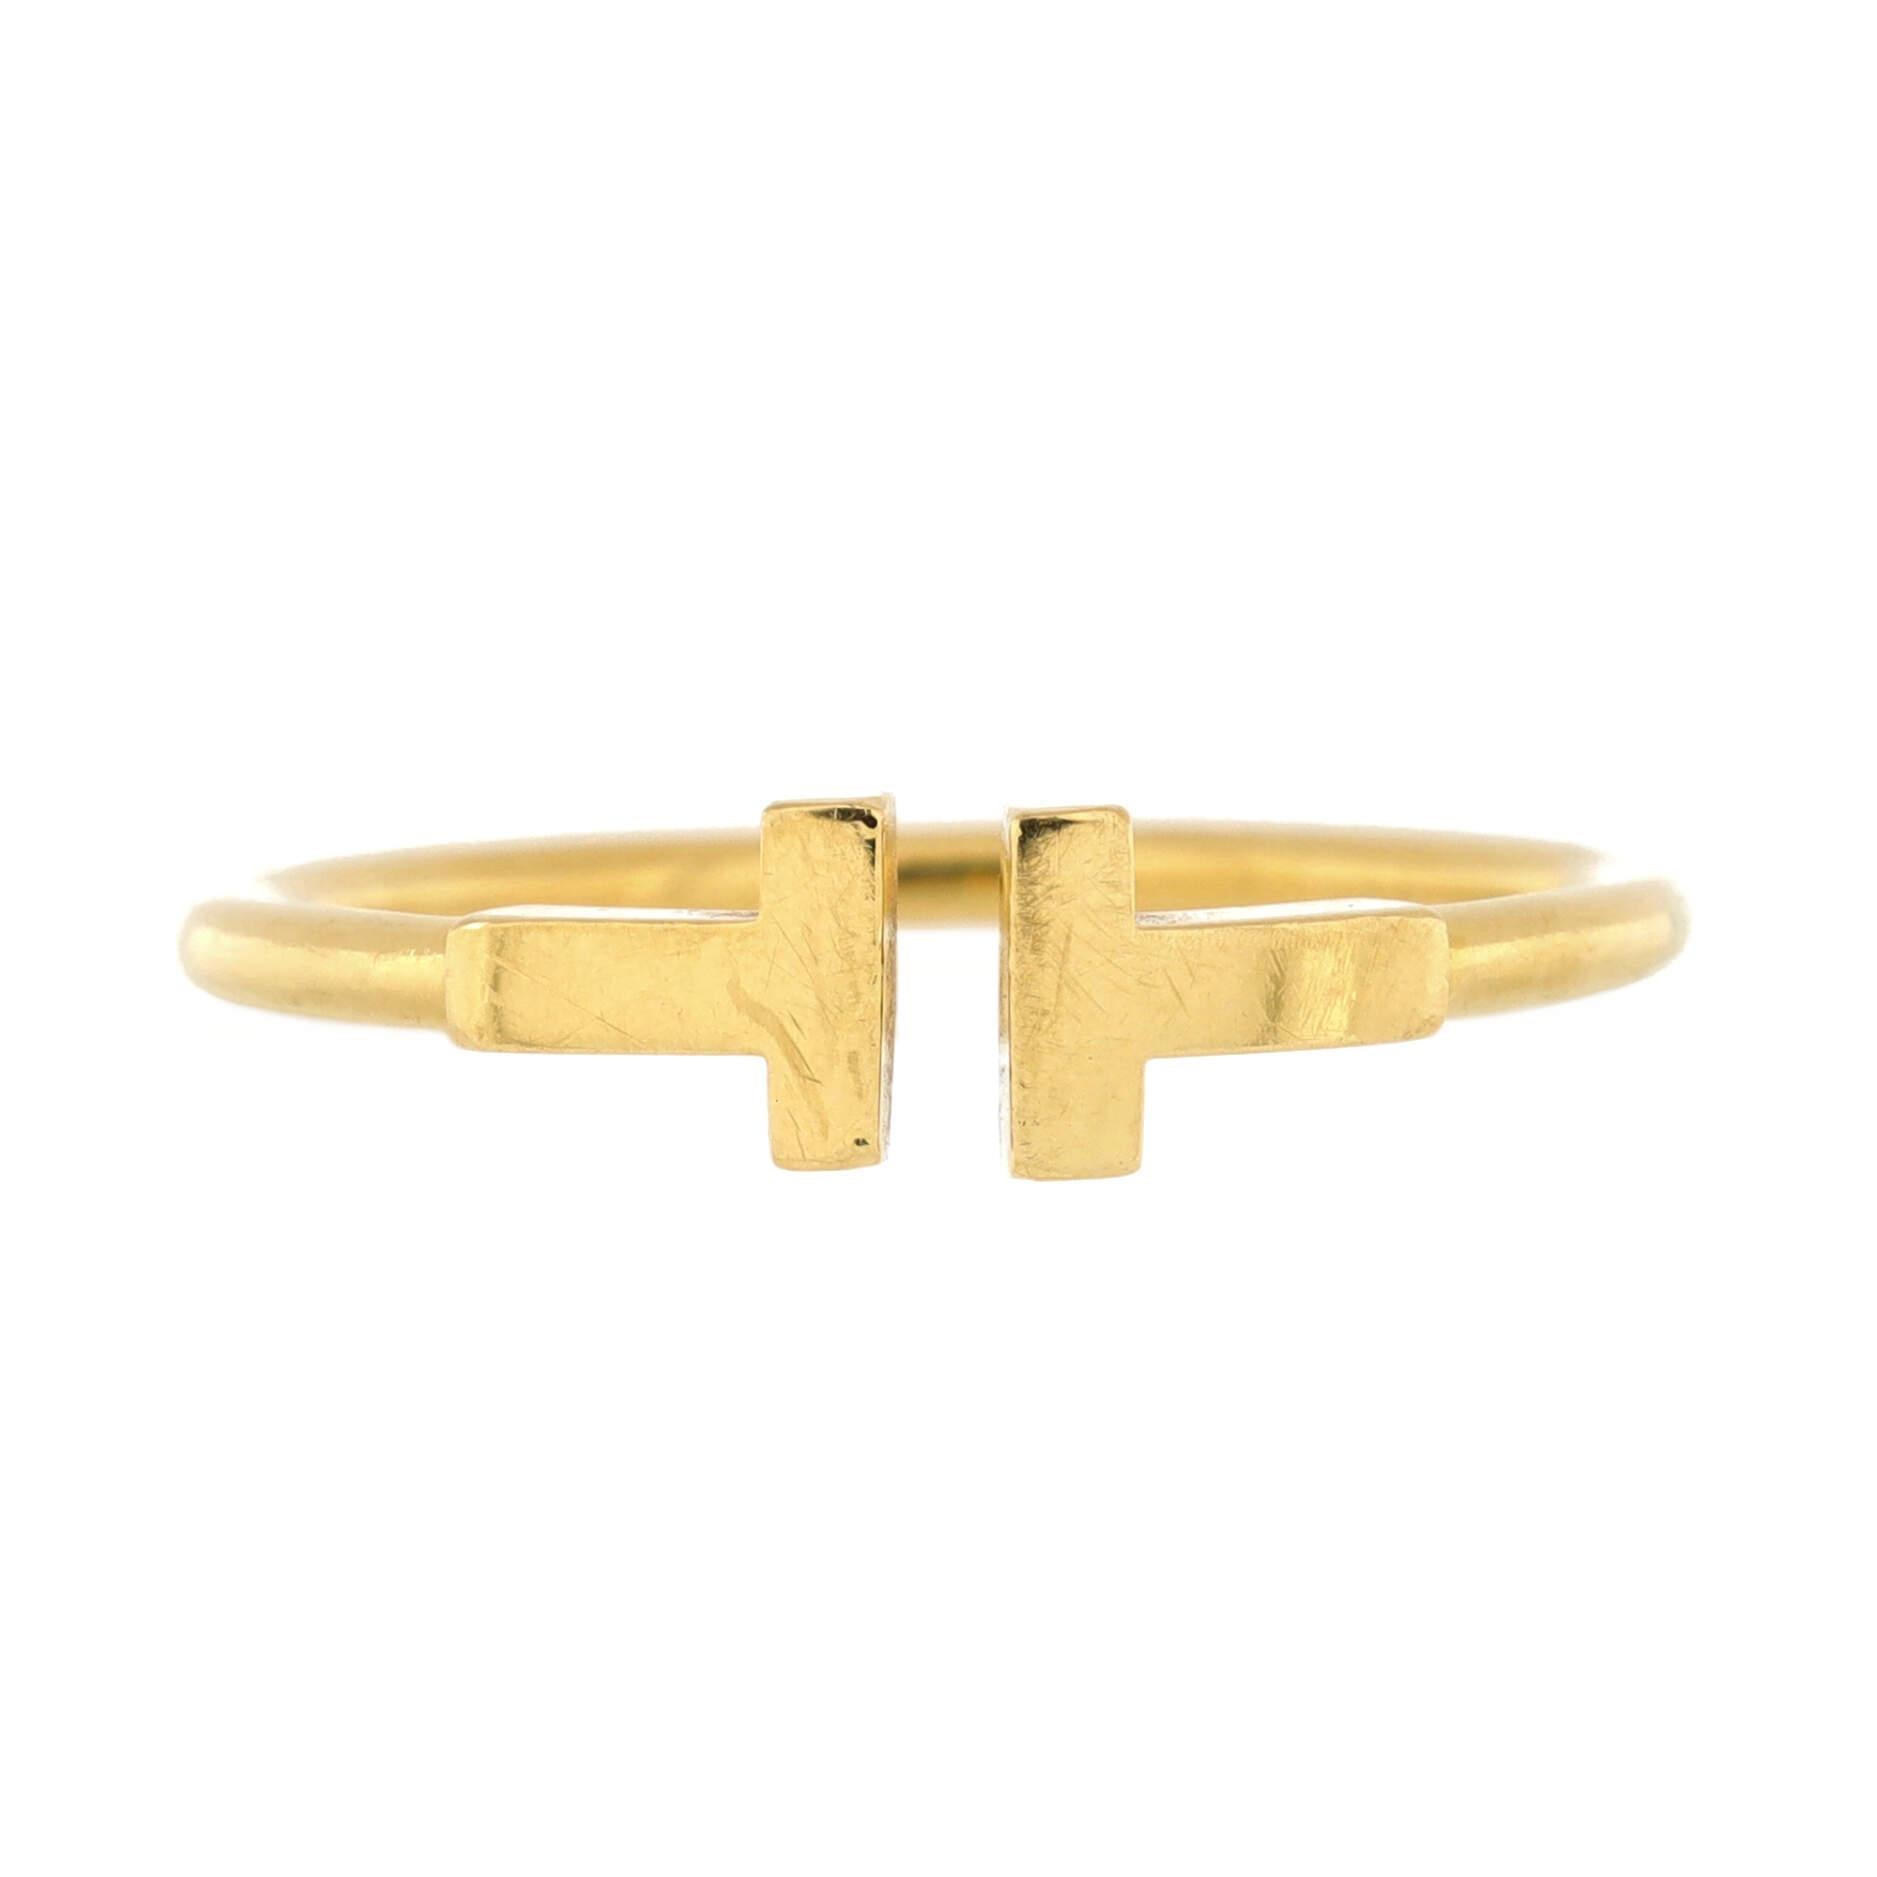 Condition: Good. Moderately heavy wear throughout.
Accessories: No Accessories
Measurements: Size: 11, Width: 1.80 mm
Designer: Tiffany & Co.
Model: T Wire Ring 18K Yellow Gold
Exterior Color: Yellow Gold
Item Number: 230114/1